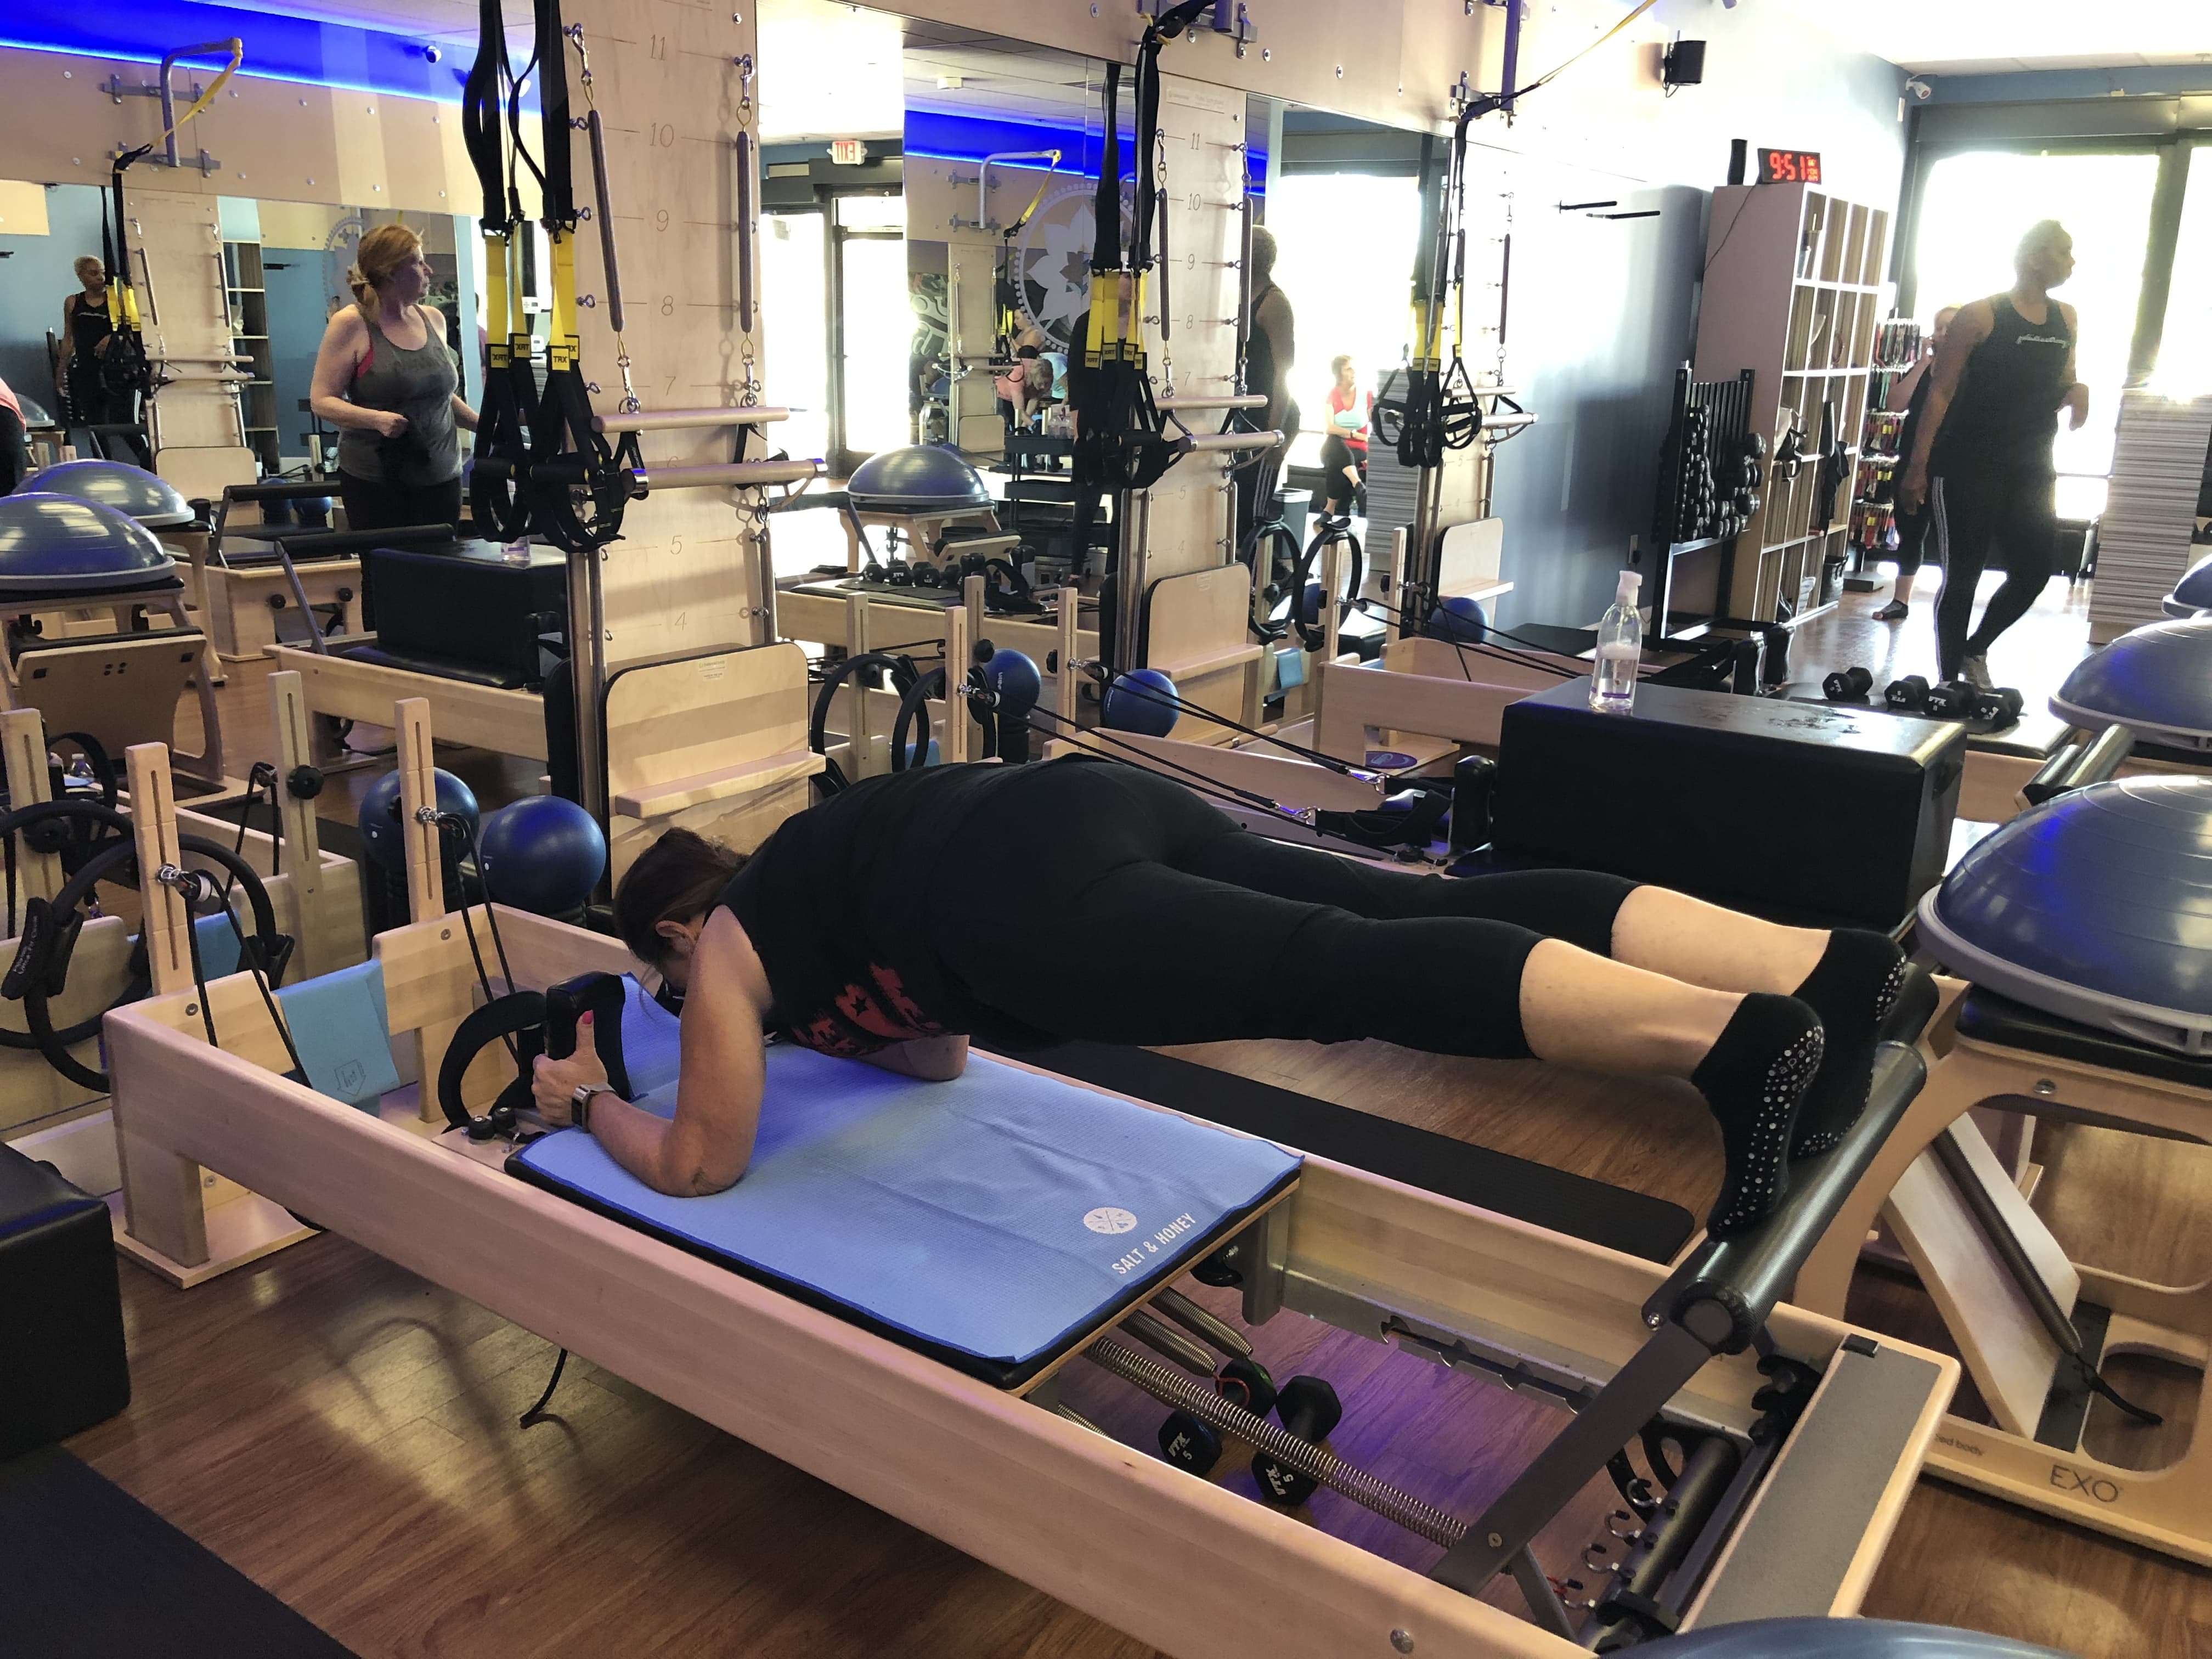 Club Pilates Basking Ridge Raises Funds For Front Line Workers